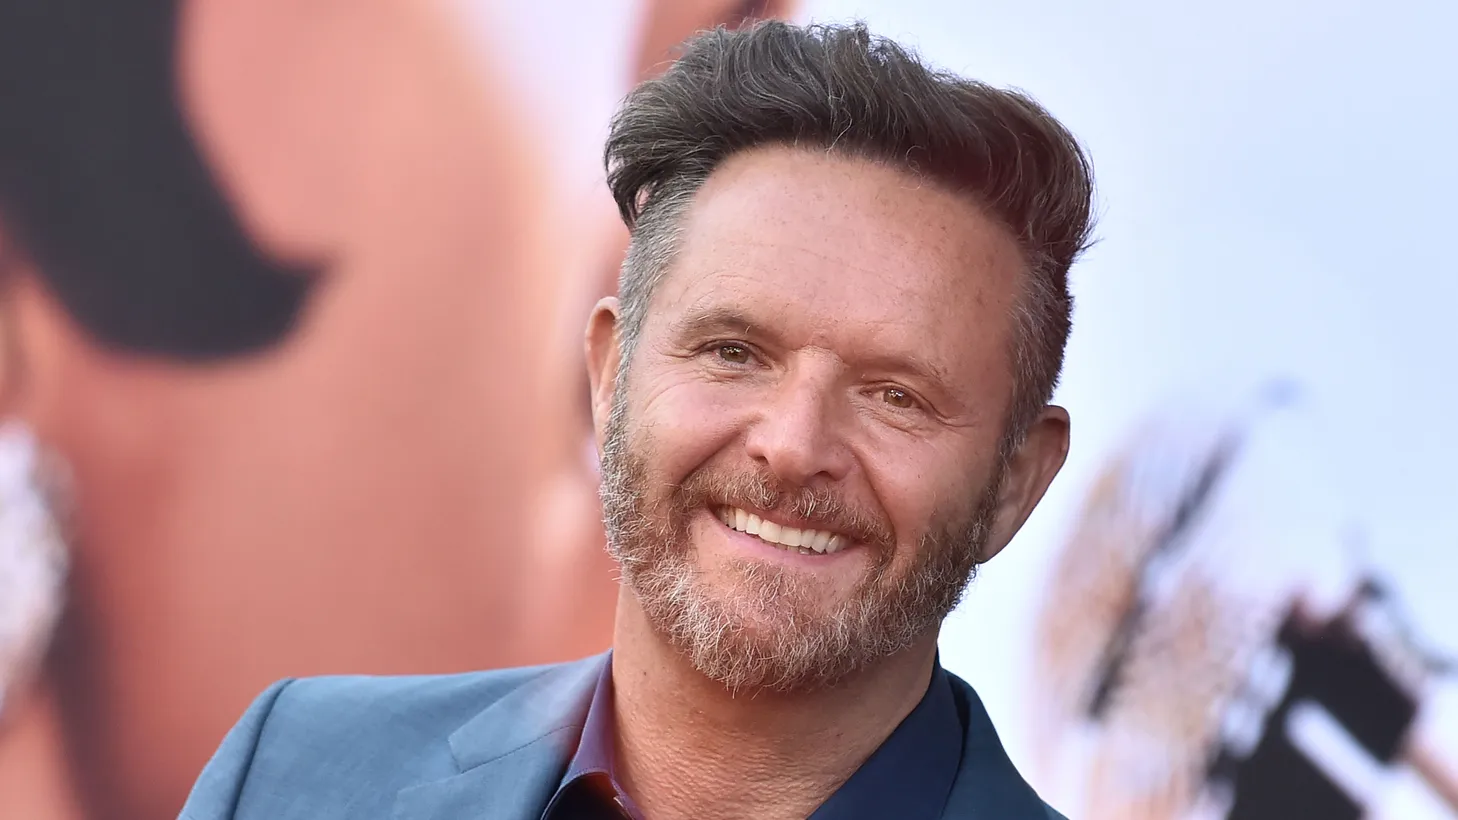 MGM Chairman Mark Burnett arrives at the premiere of “Respect” in Westwood, on August 08, 2021.